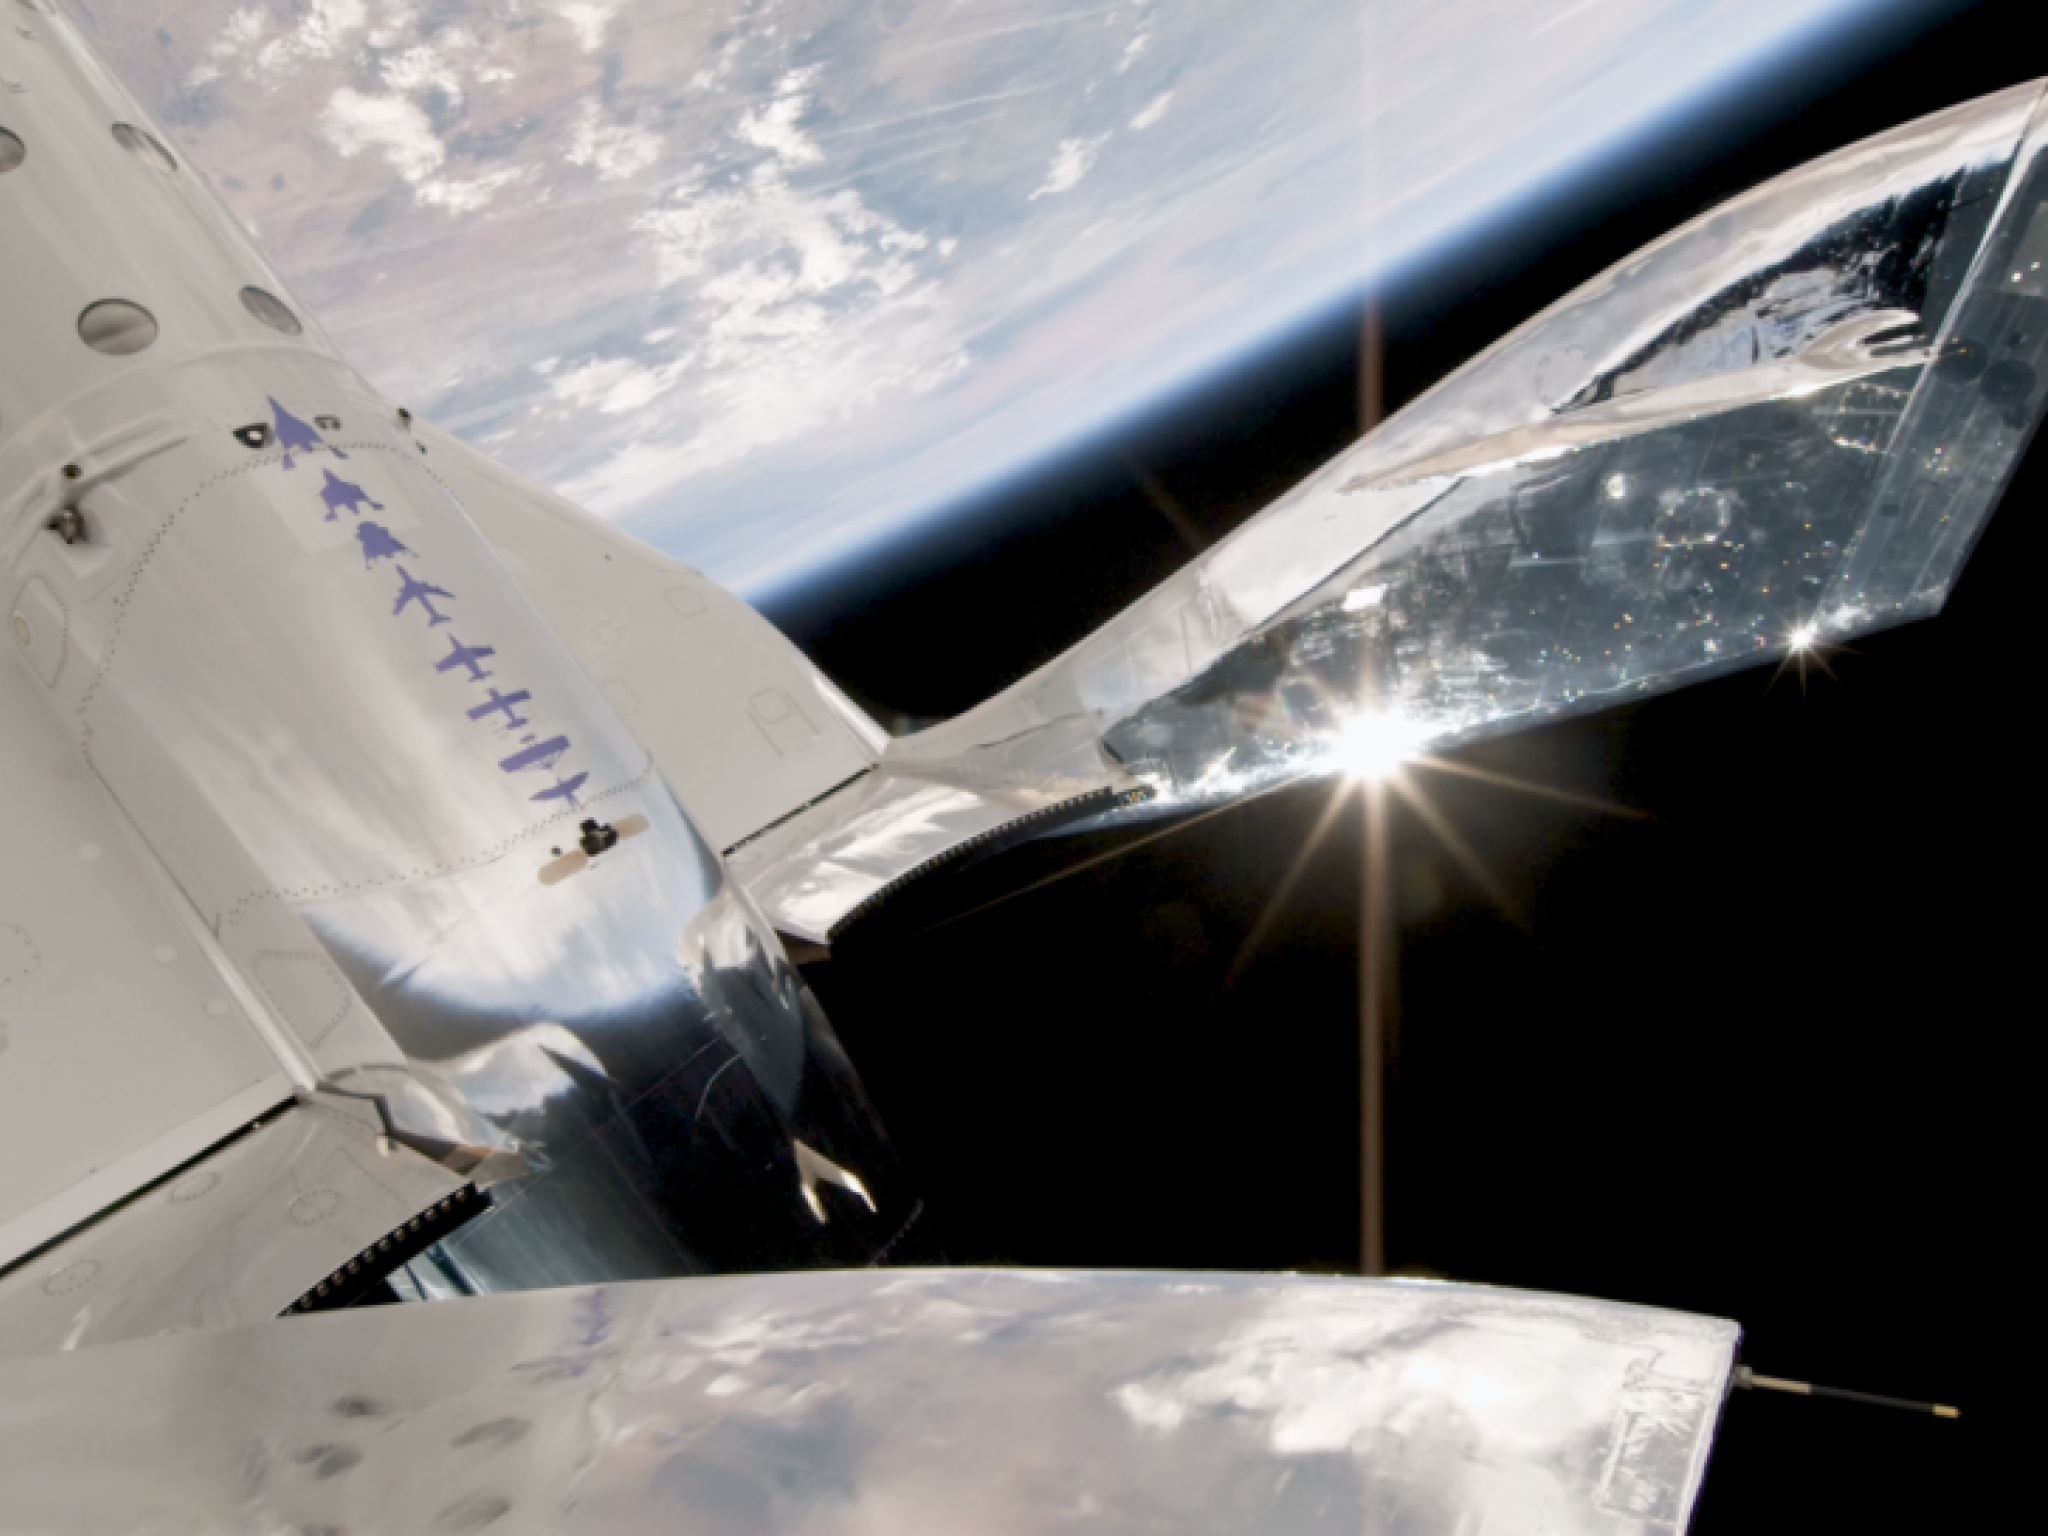  whats-going-on-with-virgin-galactic-stock-monday 